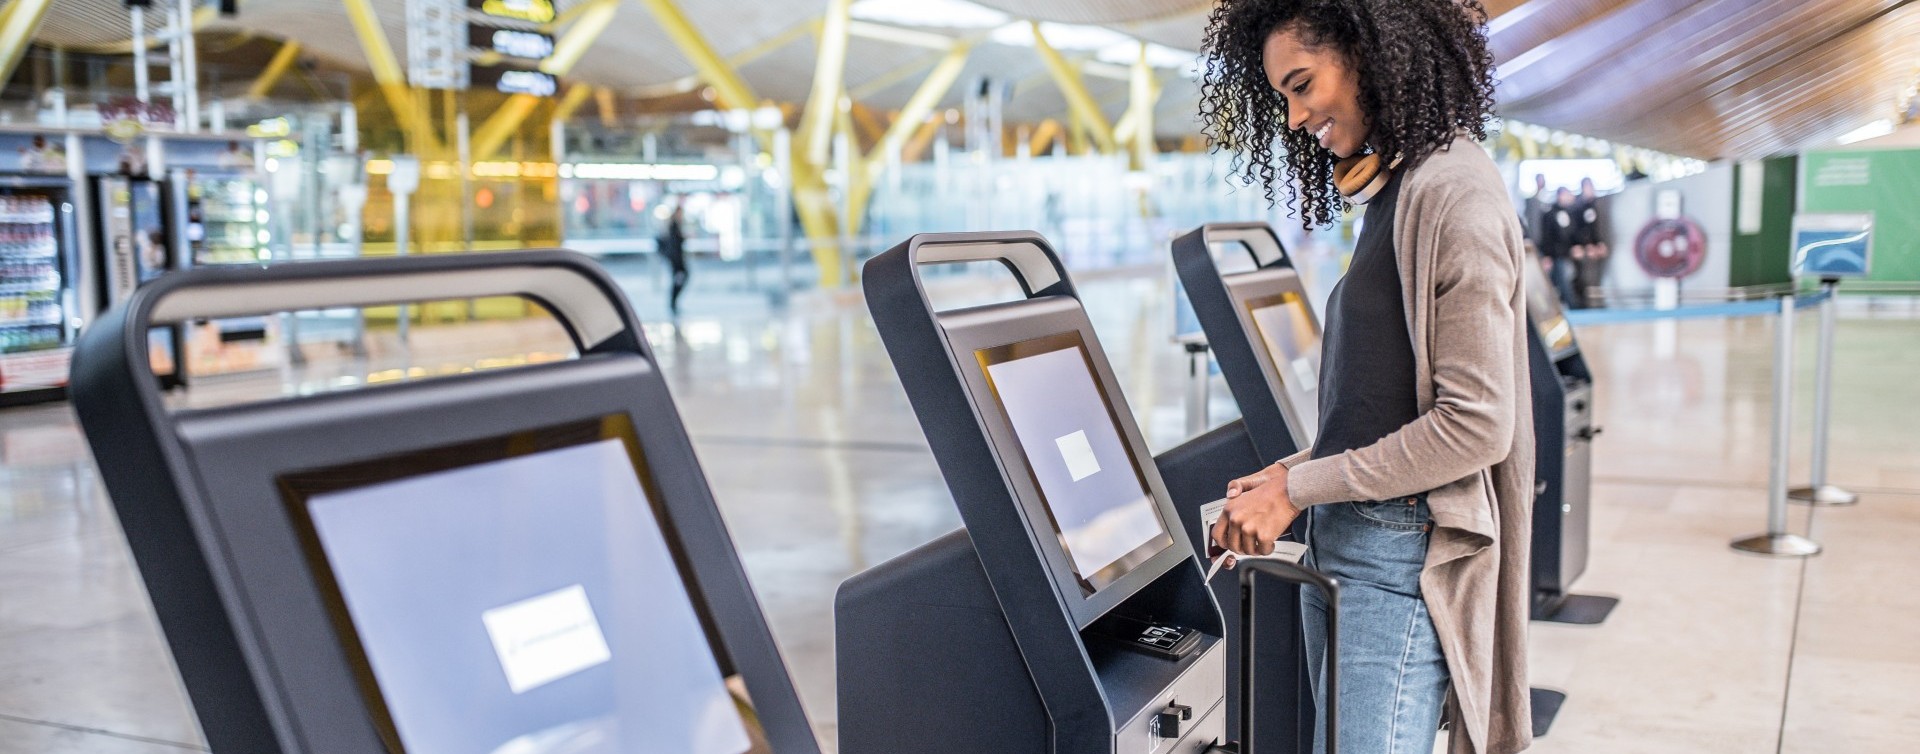 70% Faster Check-In, 99.8% Uptime: The Transformation of a Global Airline's Self-Service Experience